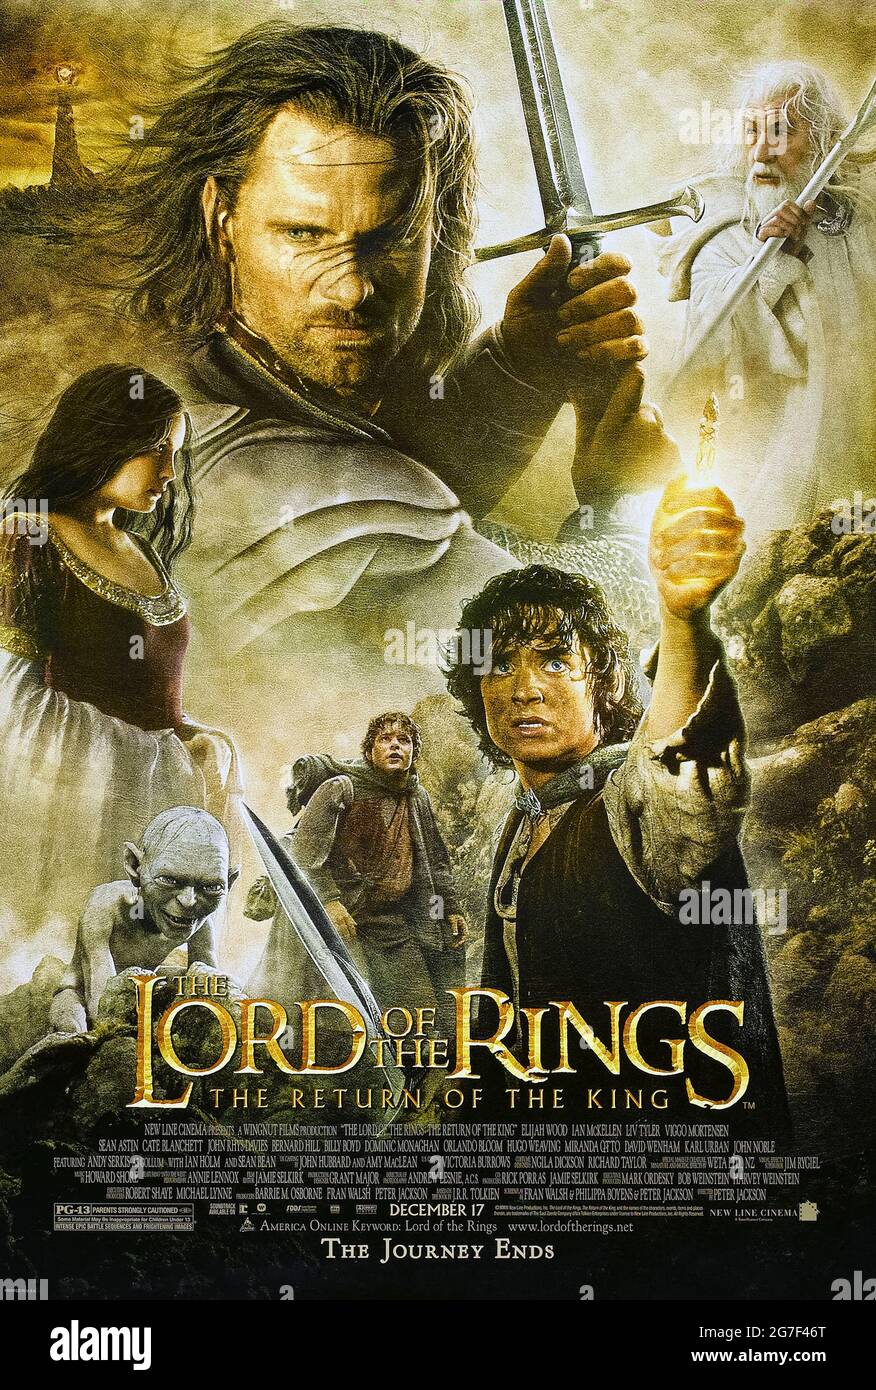 The Lord of the Rings: The Return of the King (2003) directed by Peter Jackson and starring Elijah Wood, Ian McKellen, Orlando Bloom and Viggo Mortensen. Epic conclusion to the trilogy based on J.R.R. Tolkien novels finds the hobbits approaching Mount Doom as Sauron's army bears down on Gandalf and Aragorn. Stock Photo